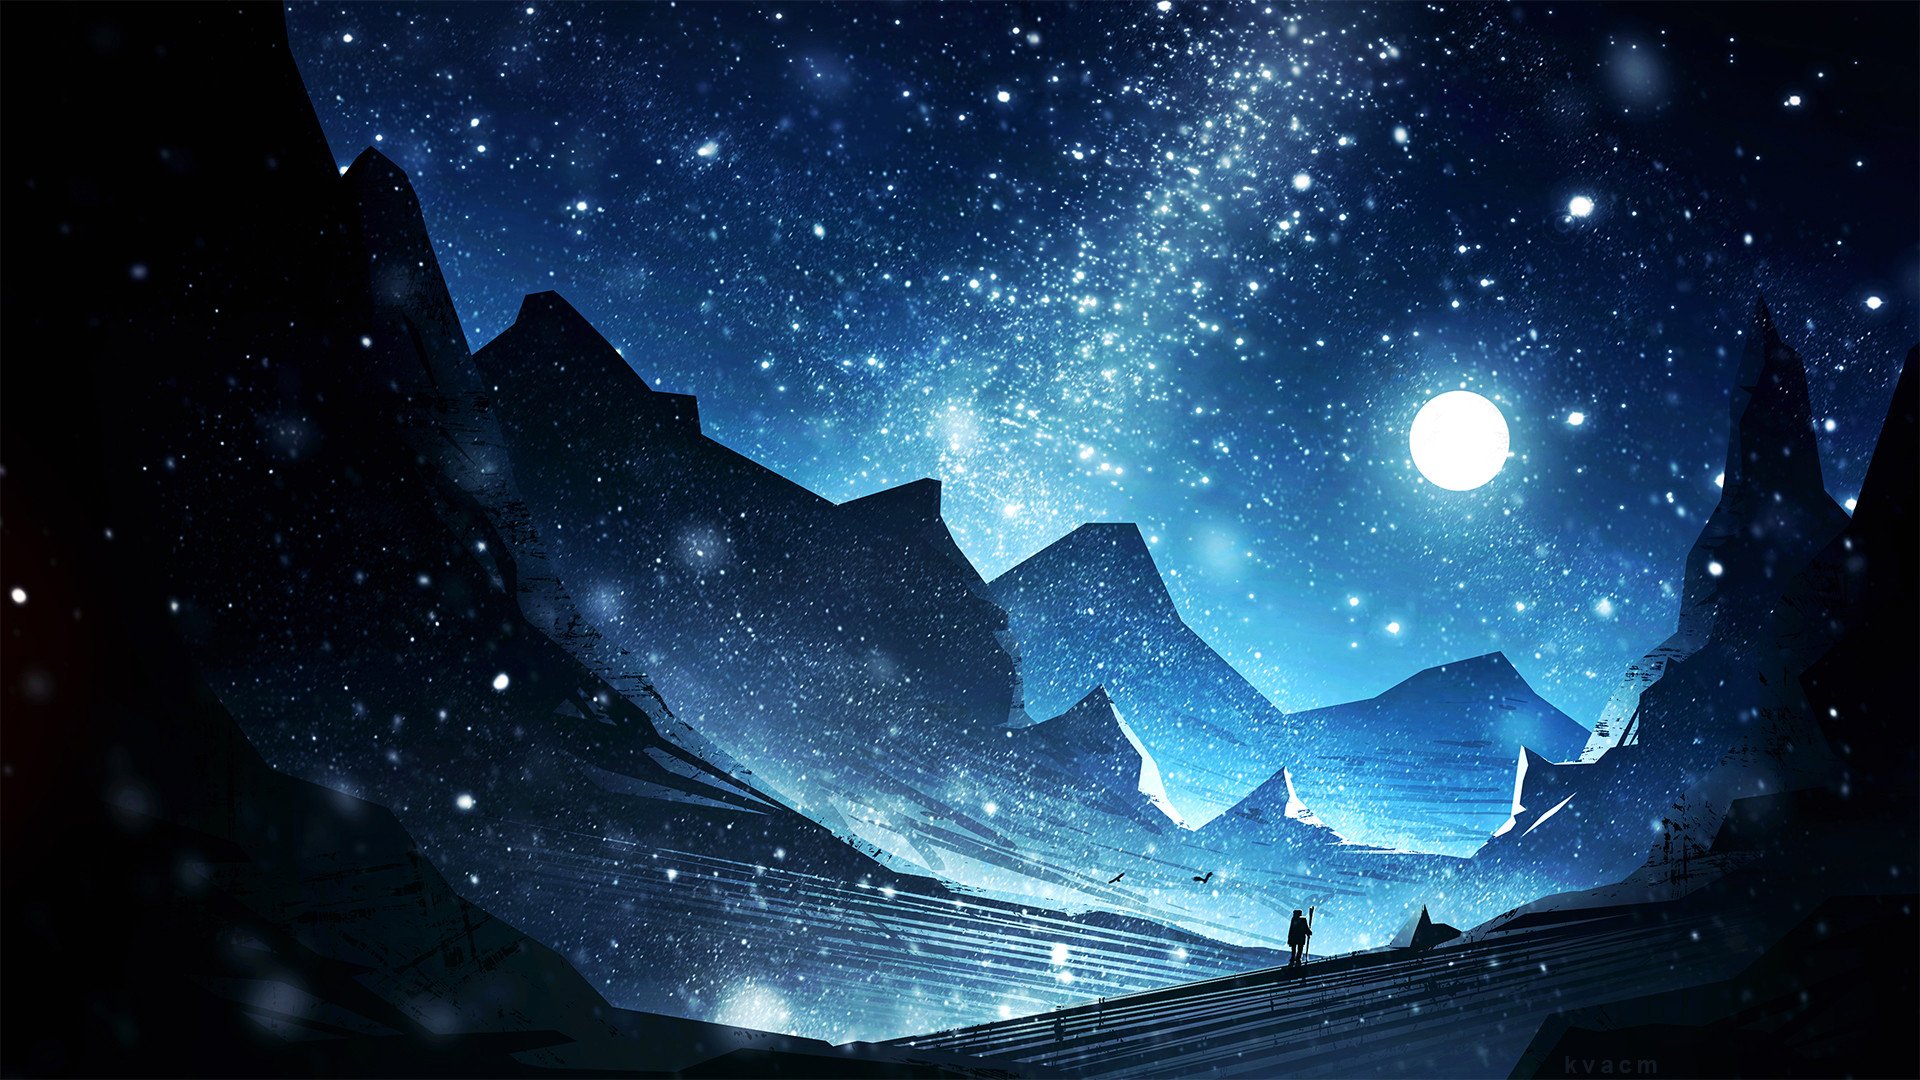 An image with magic in the mountains at night by moonlight